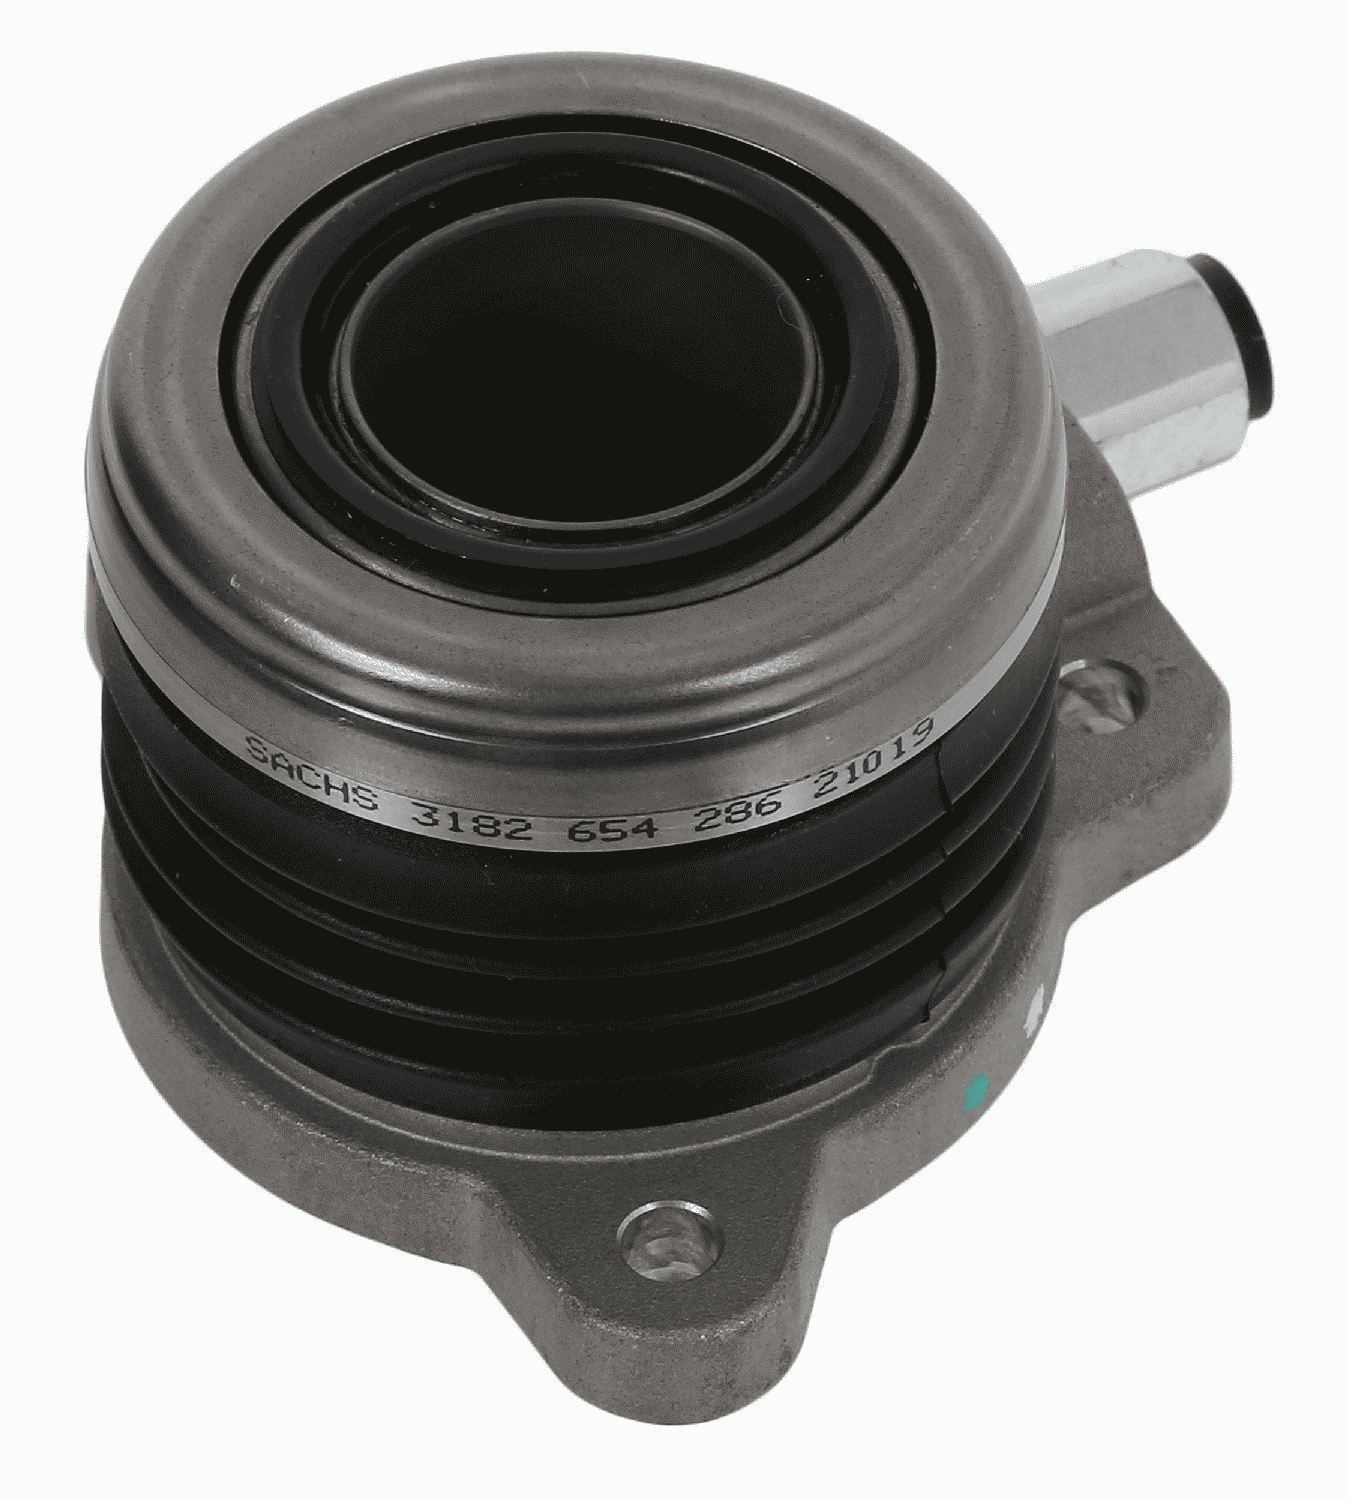 SACHS Concentric slave cylinder 3182 654 286 buy